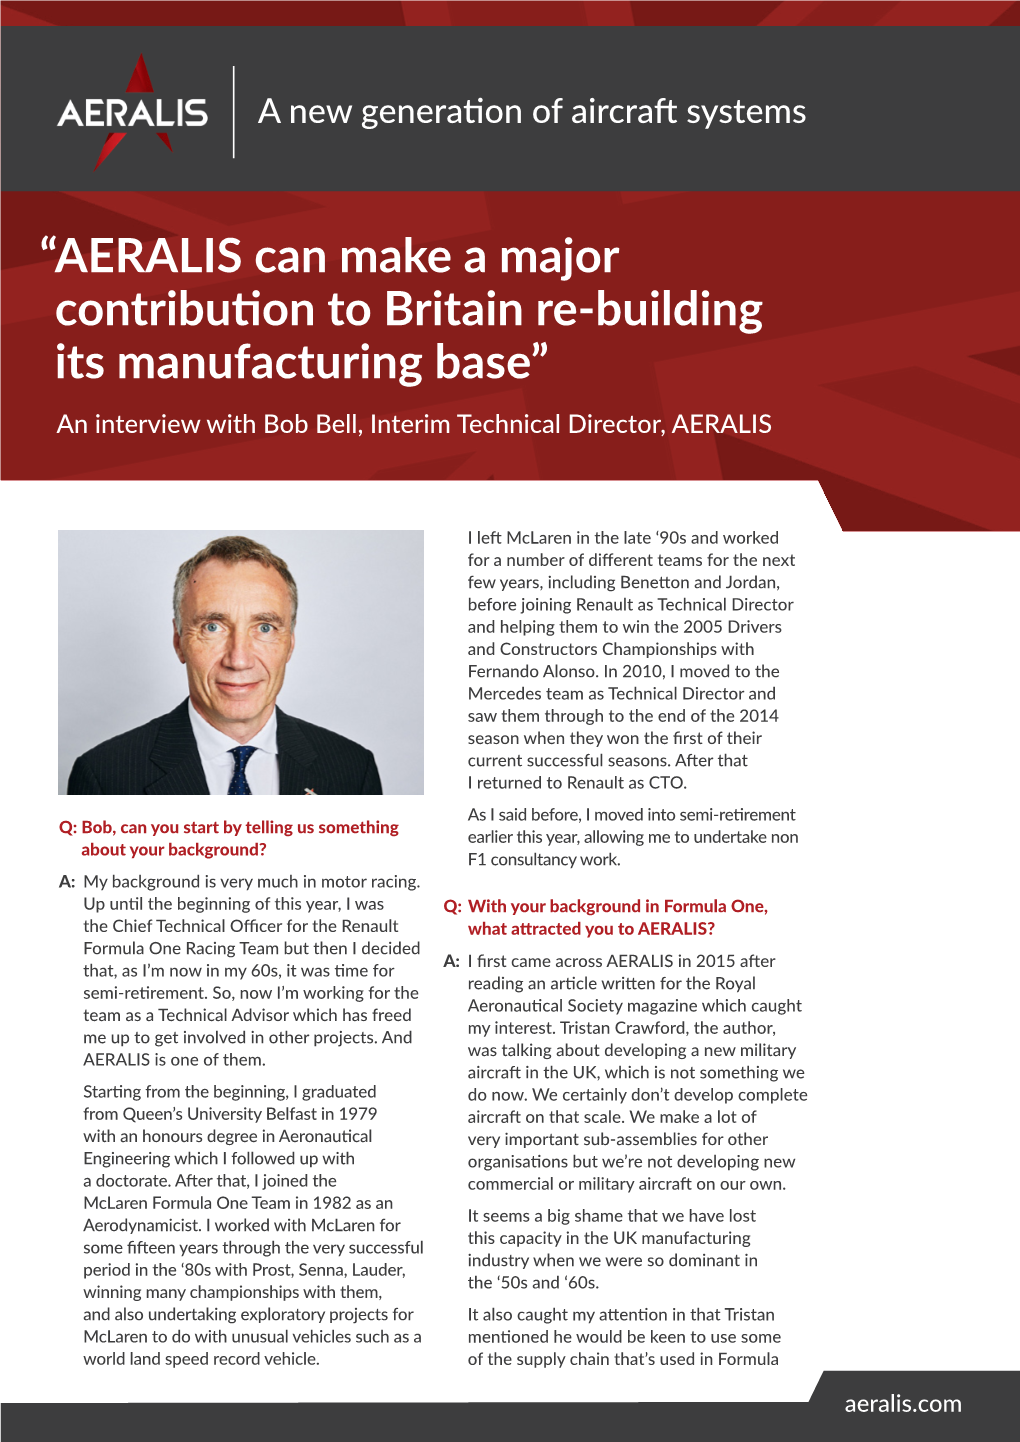 “ AERALIS Can Make a Major Contribution to Britain Re-Building Its Manufacturing Base”